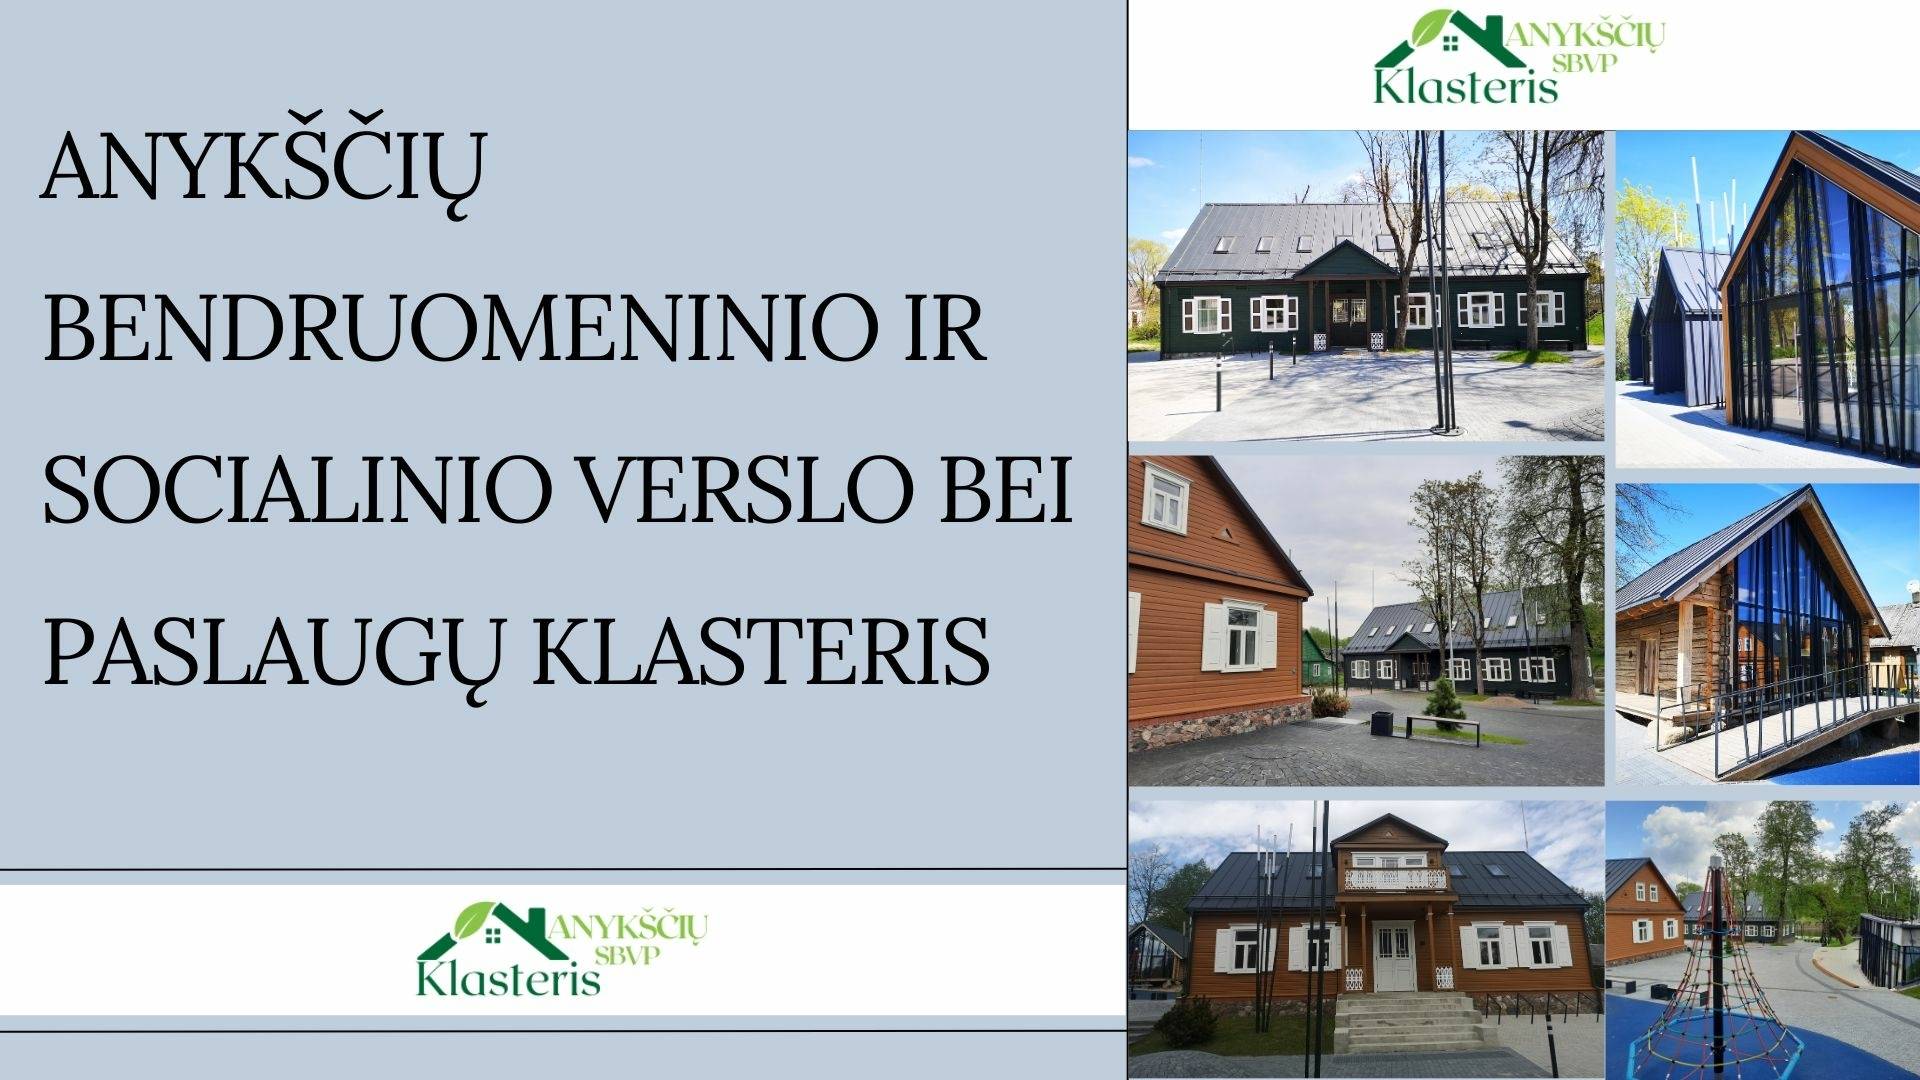 New member of Anykščiai community and social business and service cluster